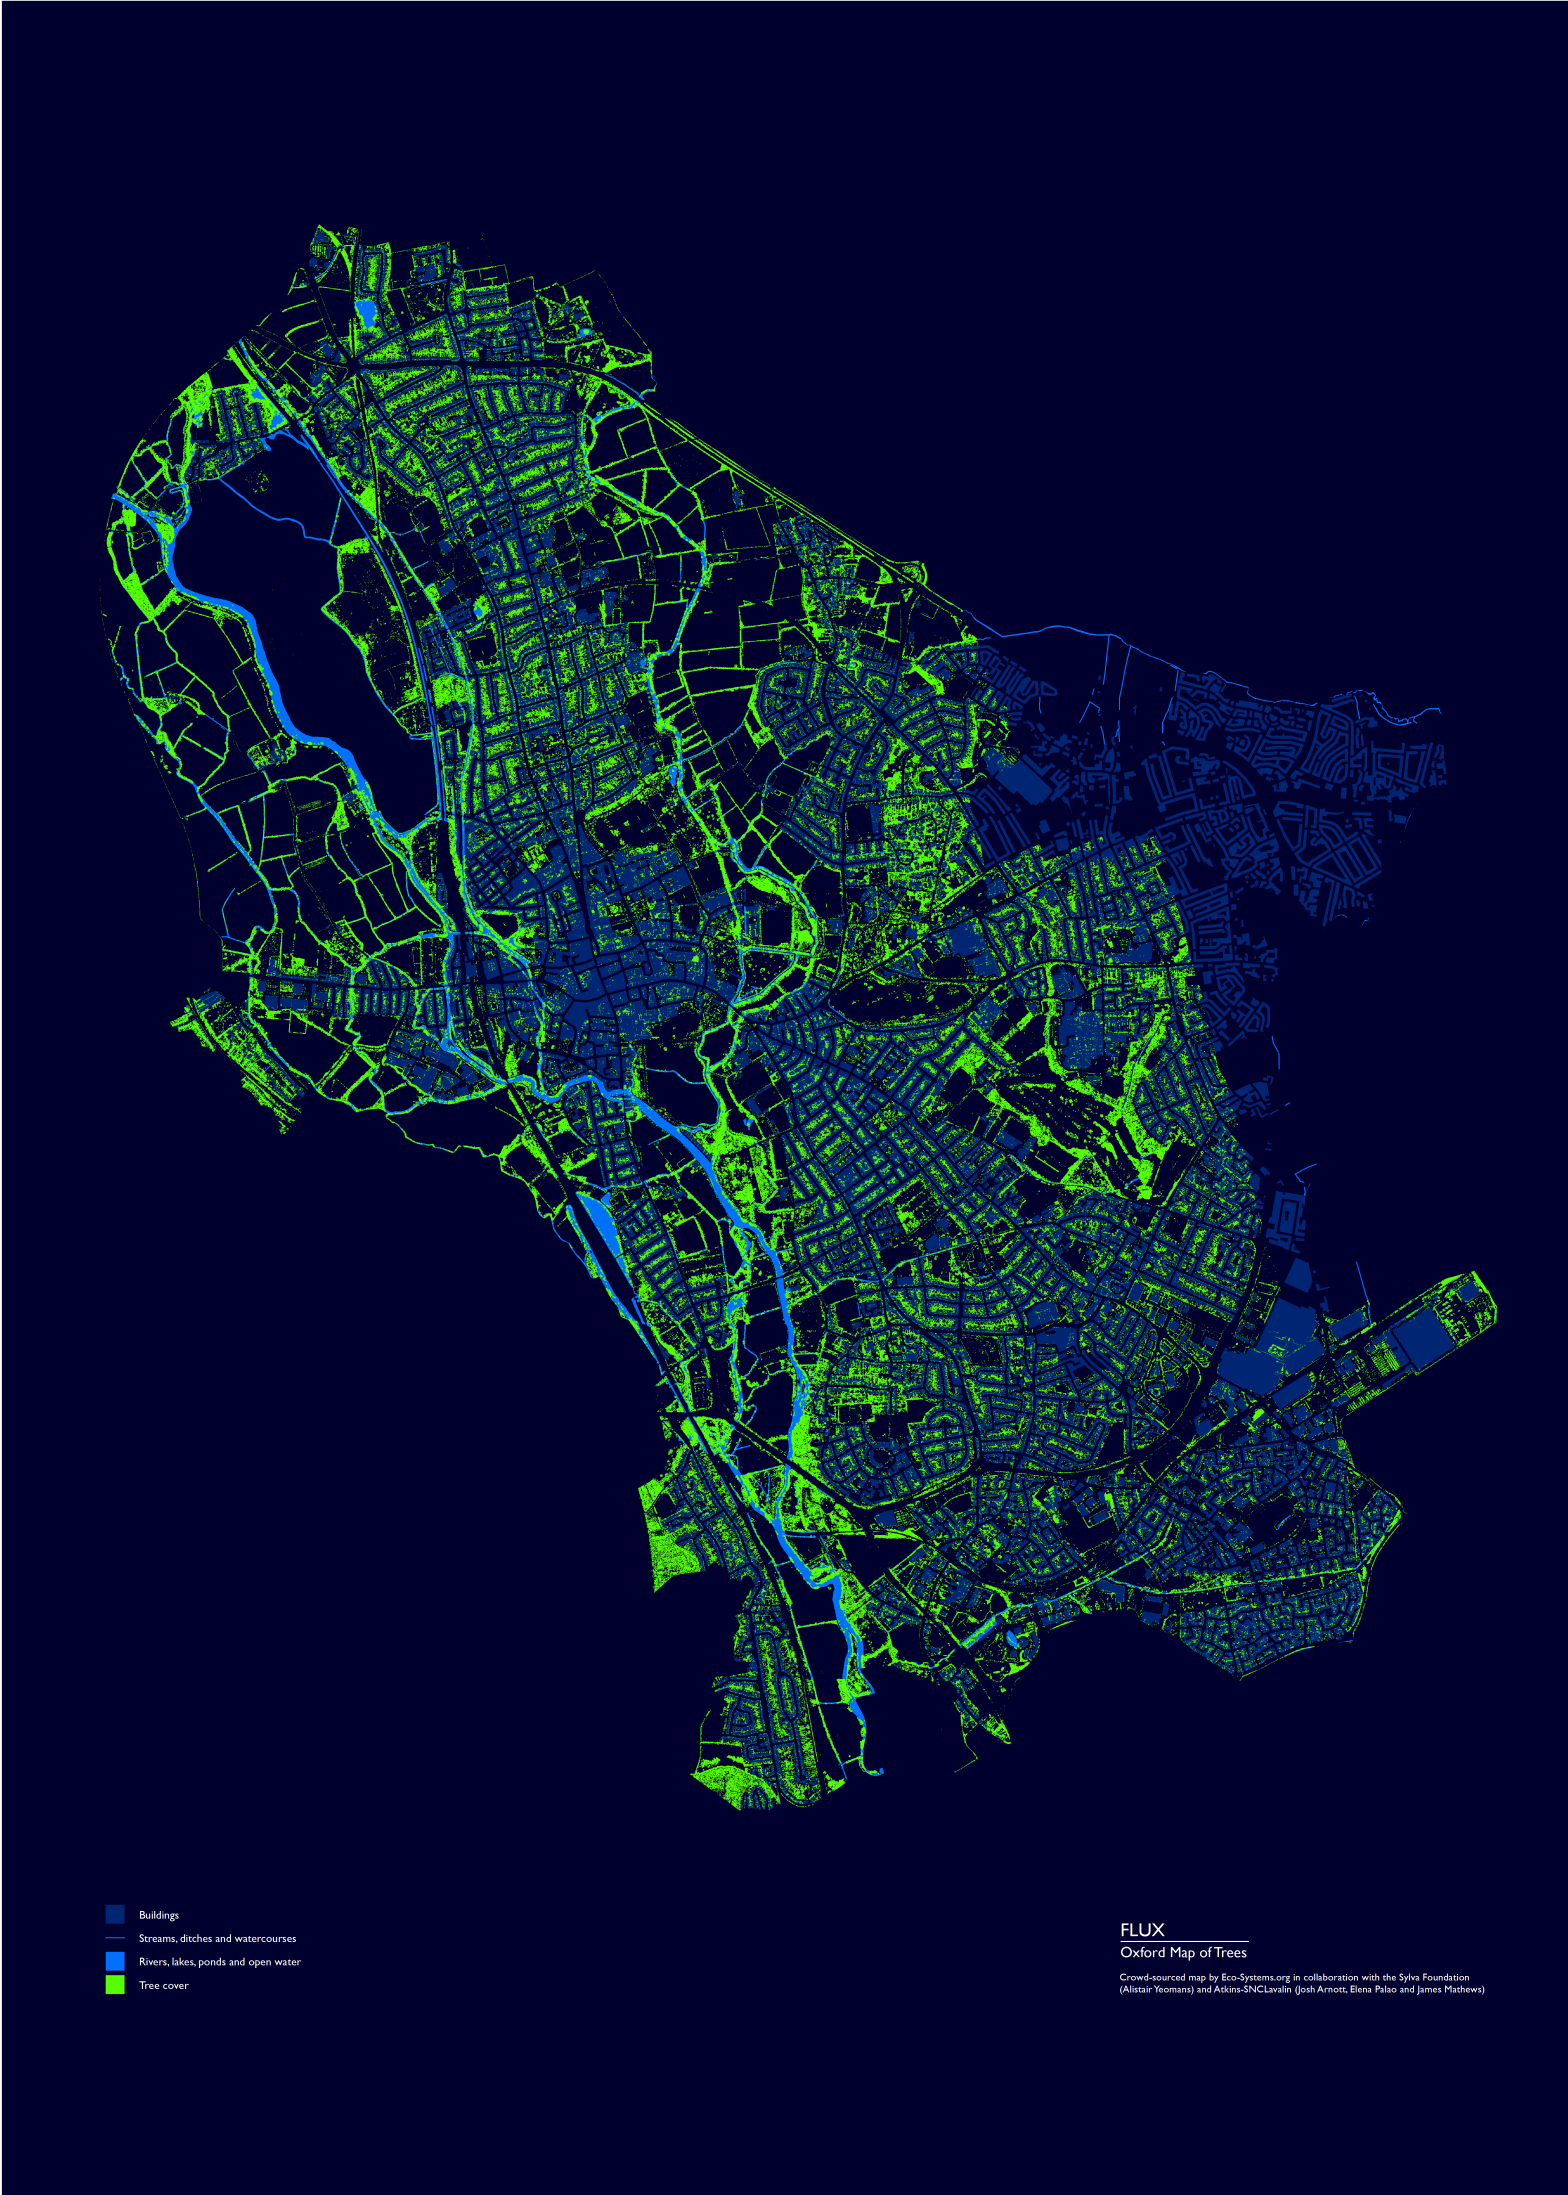 A dark blue line map of Oxford with locations highlighted in different tones of blue and bright green to illustrate areas with Trees.